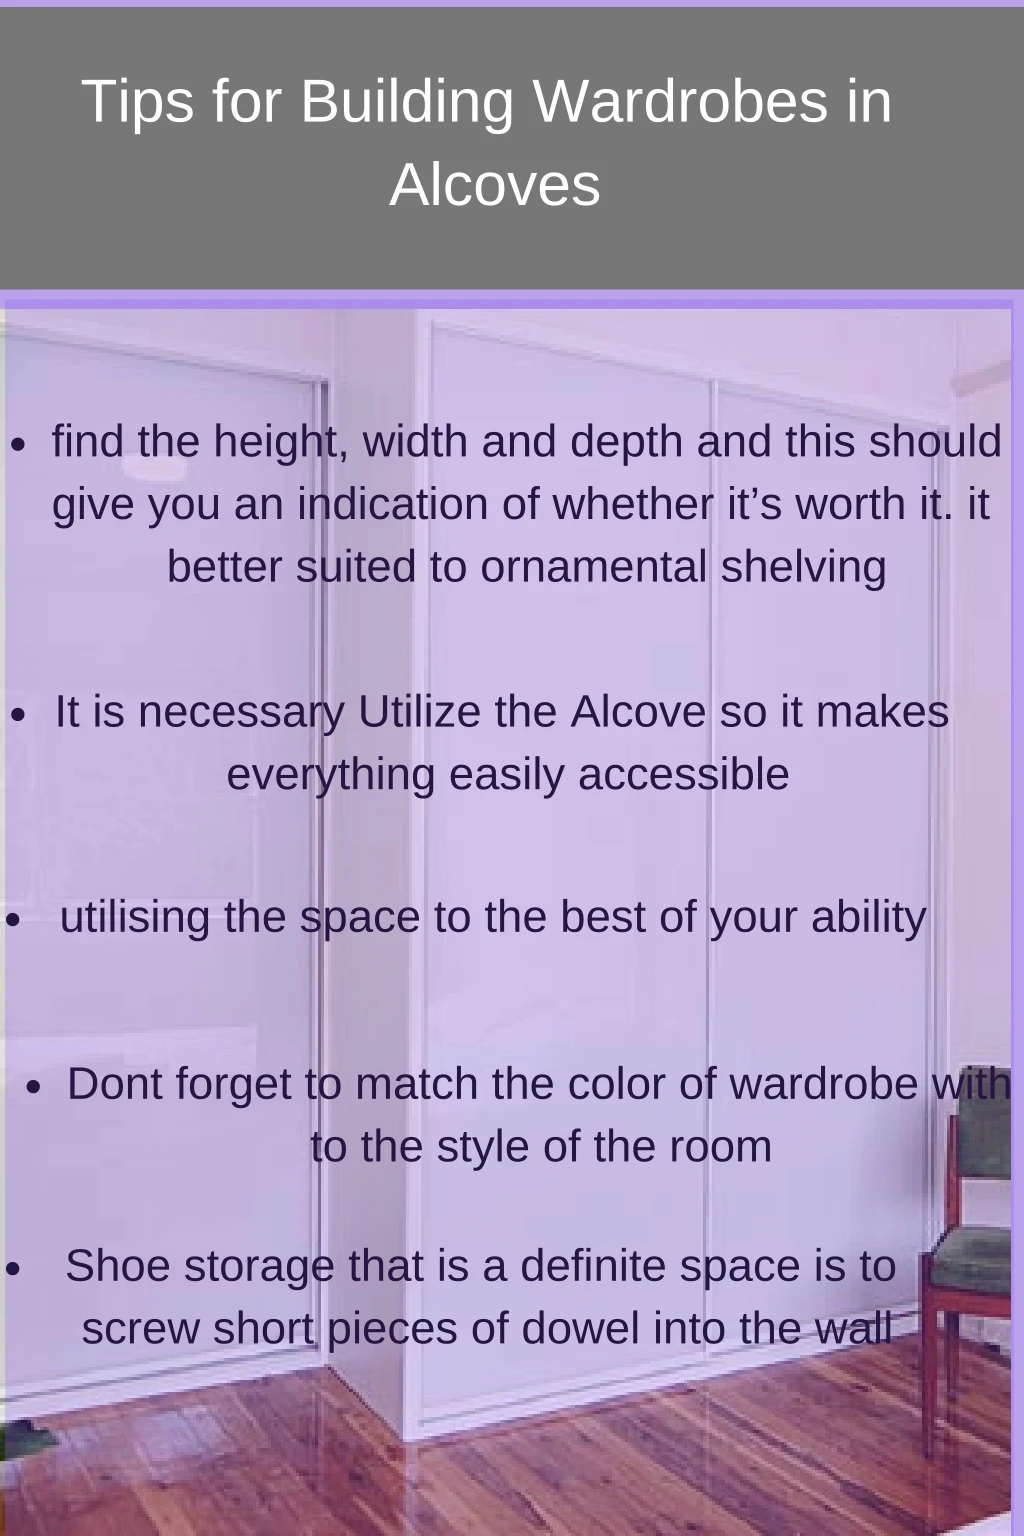 tips for building wardrobes in alcoves